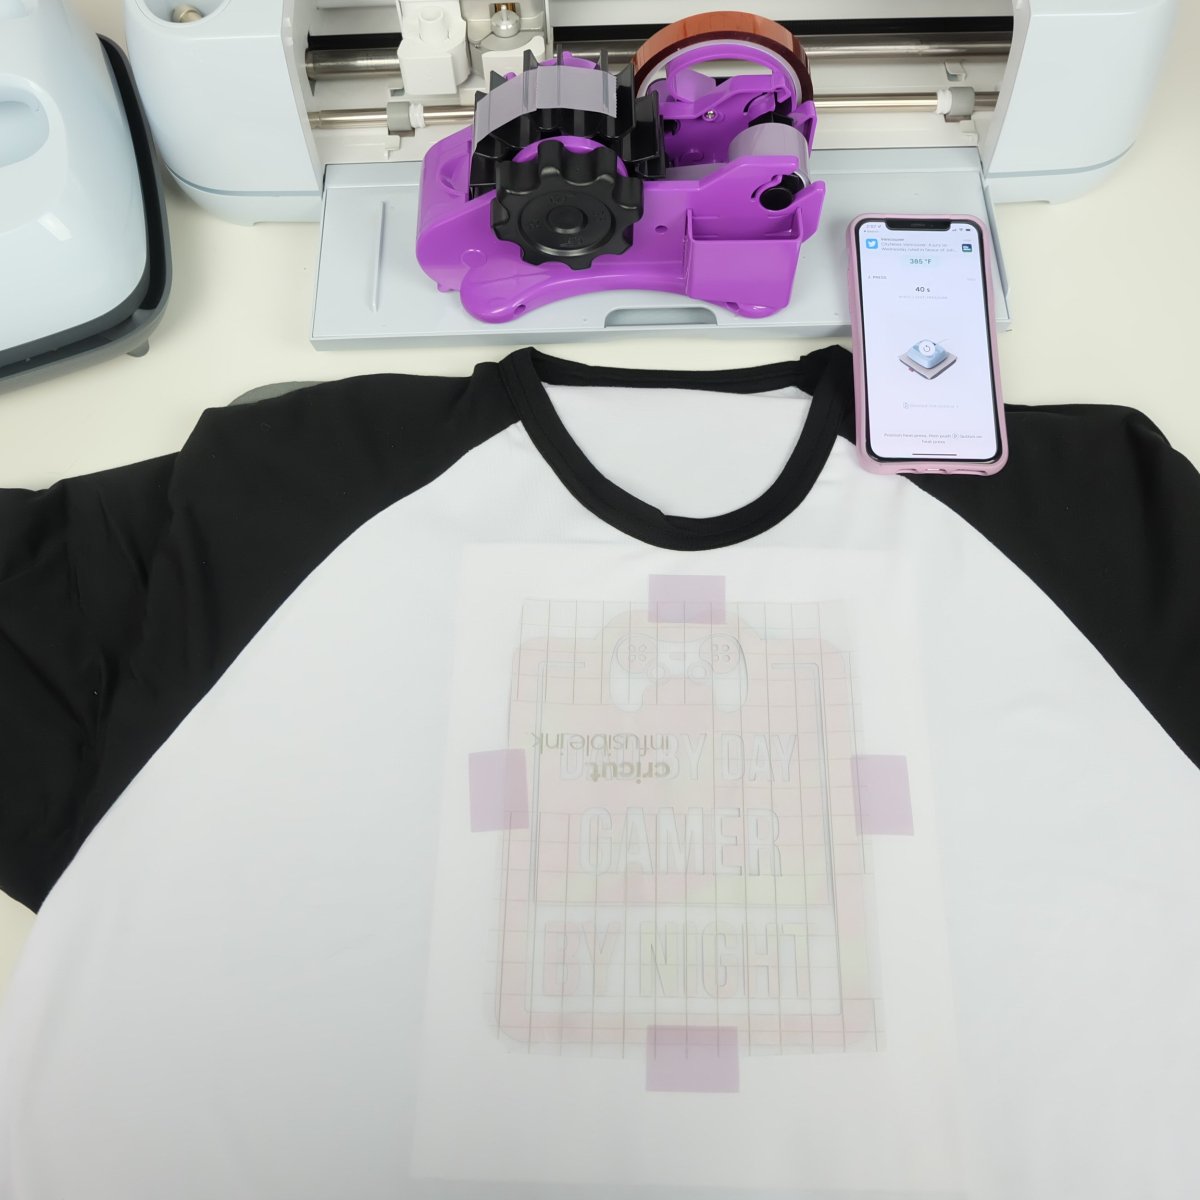 Cricut Infusible Ink Shirt with a Cricut Infusible Ink Design taped to it. 